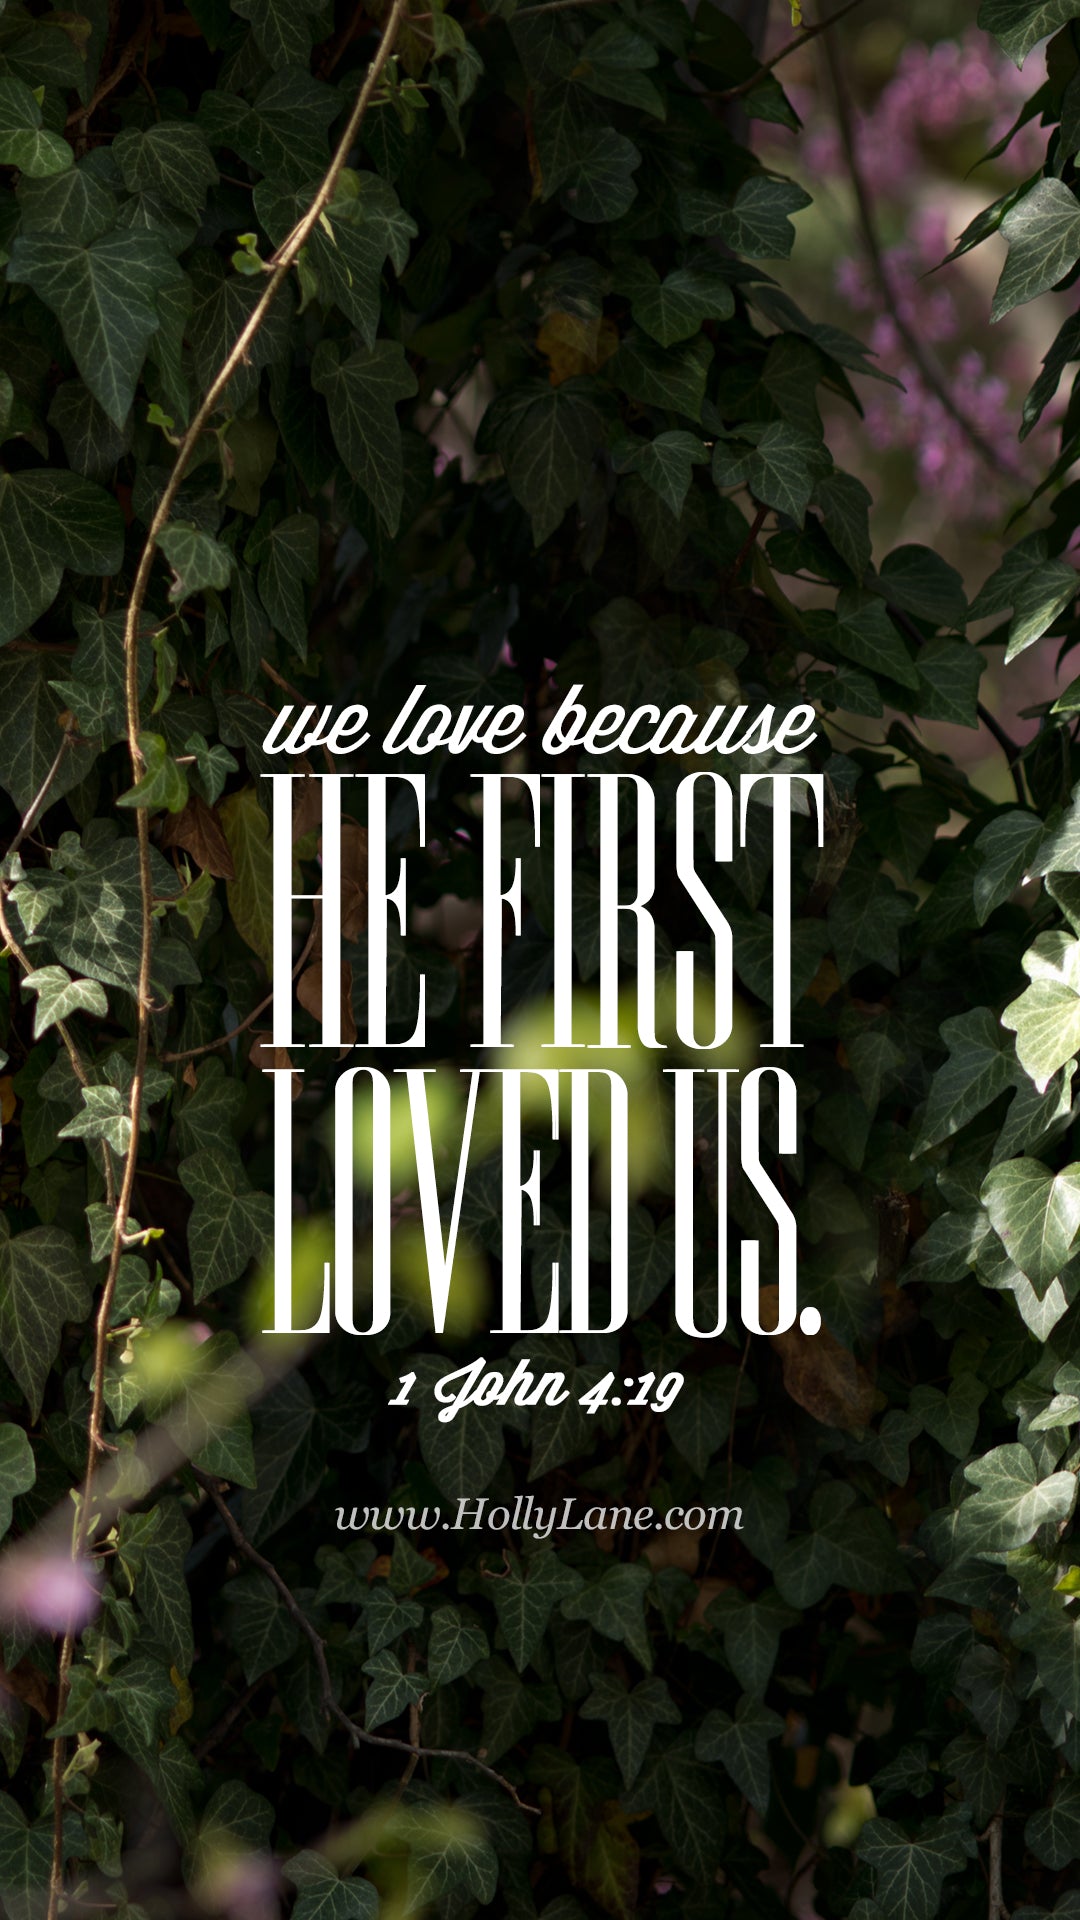 “We love because He first loved us.” 1 John 4:19 Enjoy this free mobile wallpaper by Holly Lane and check out Hearts Connected collection inspired by this verse.